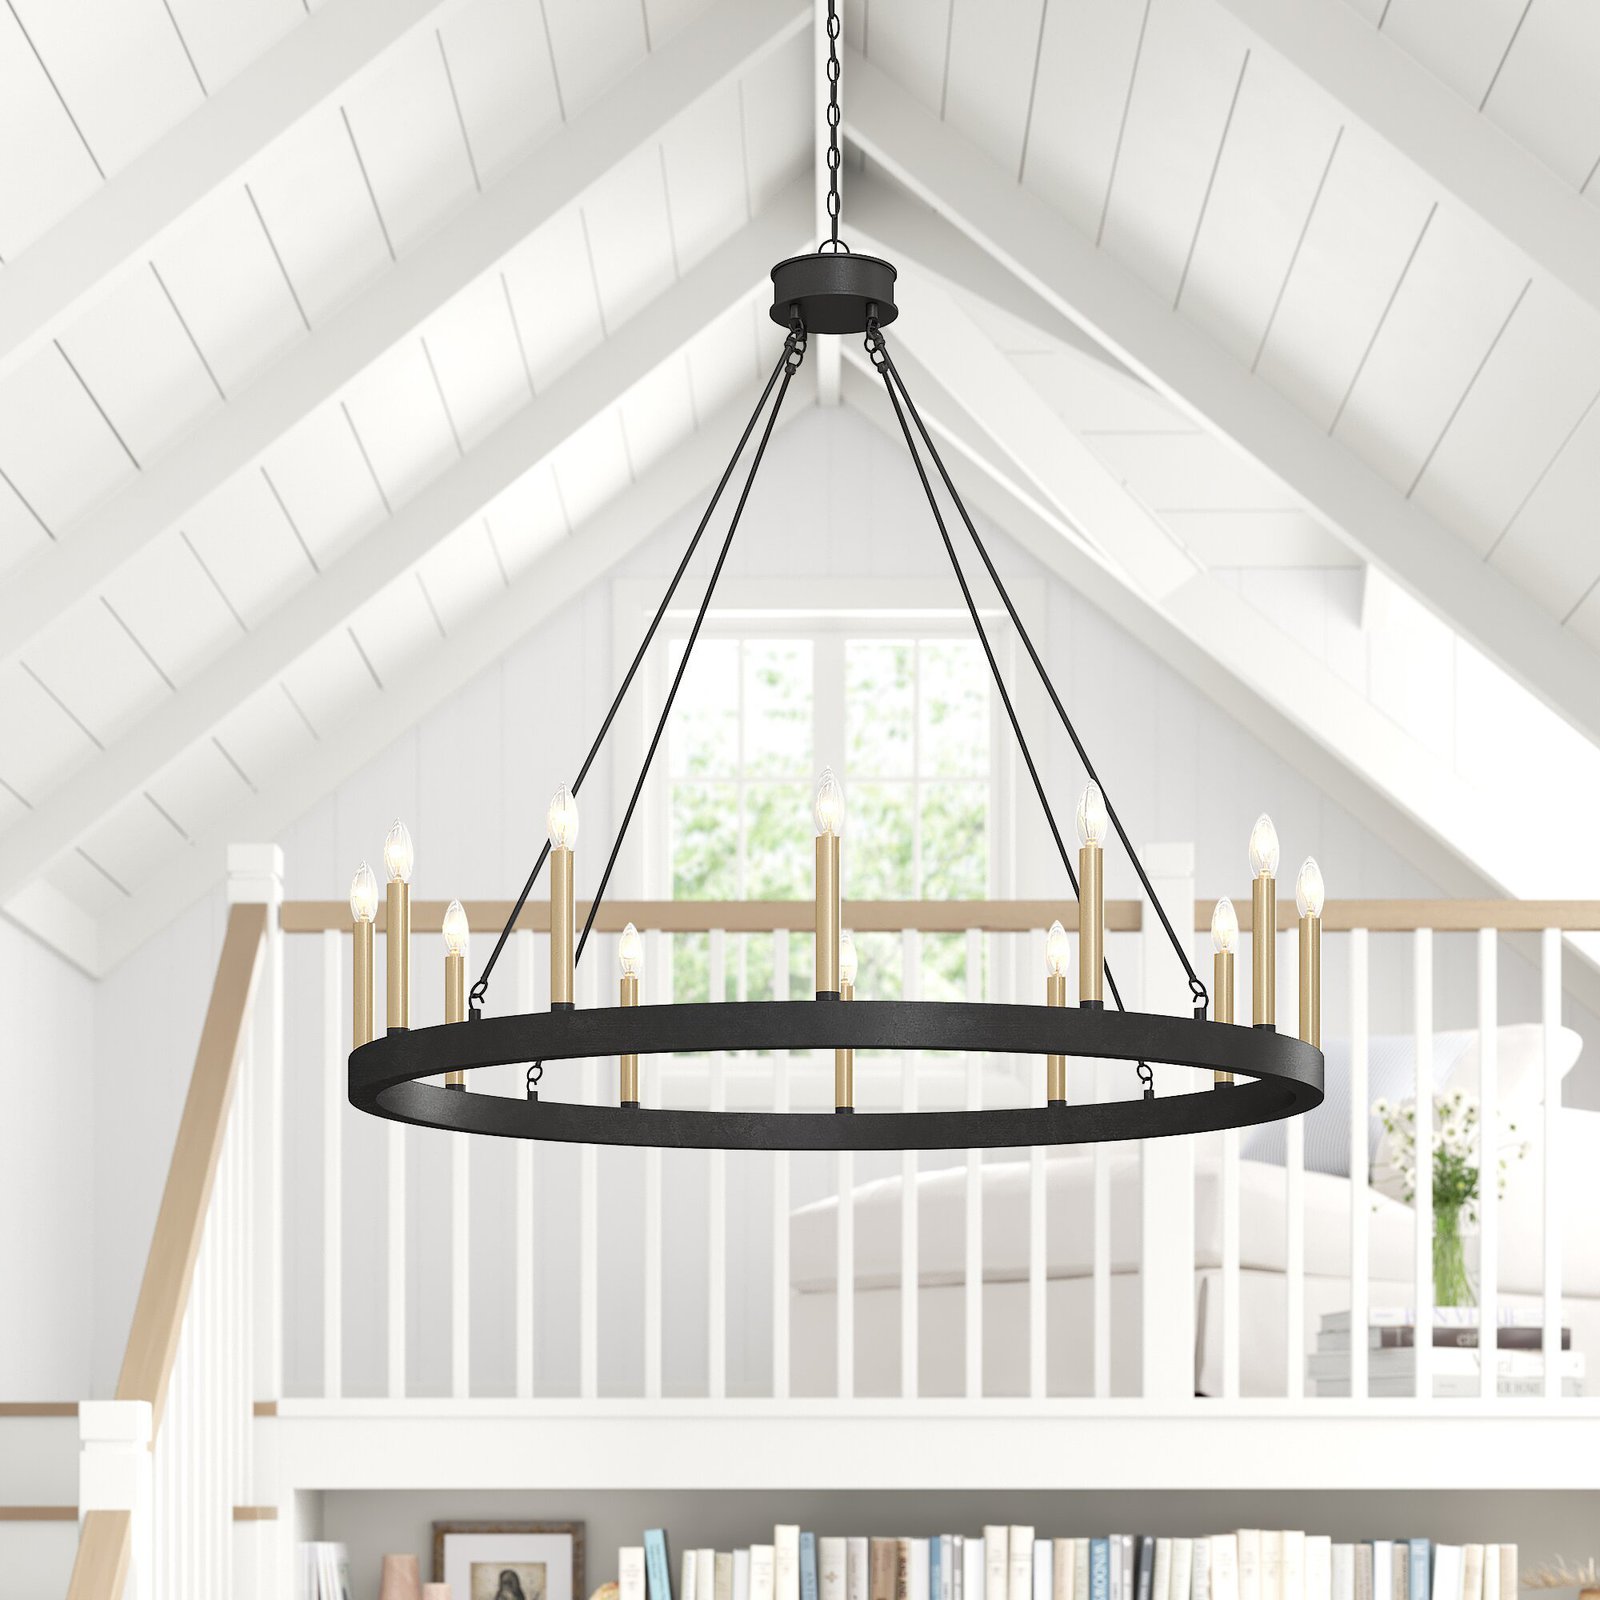 Make a Statement with a Large Wagon Wheel Fixture